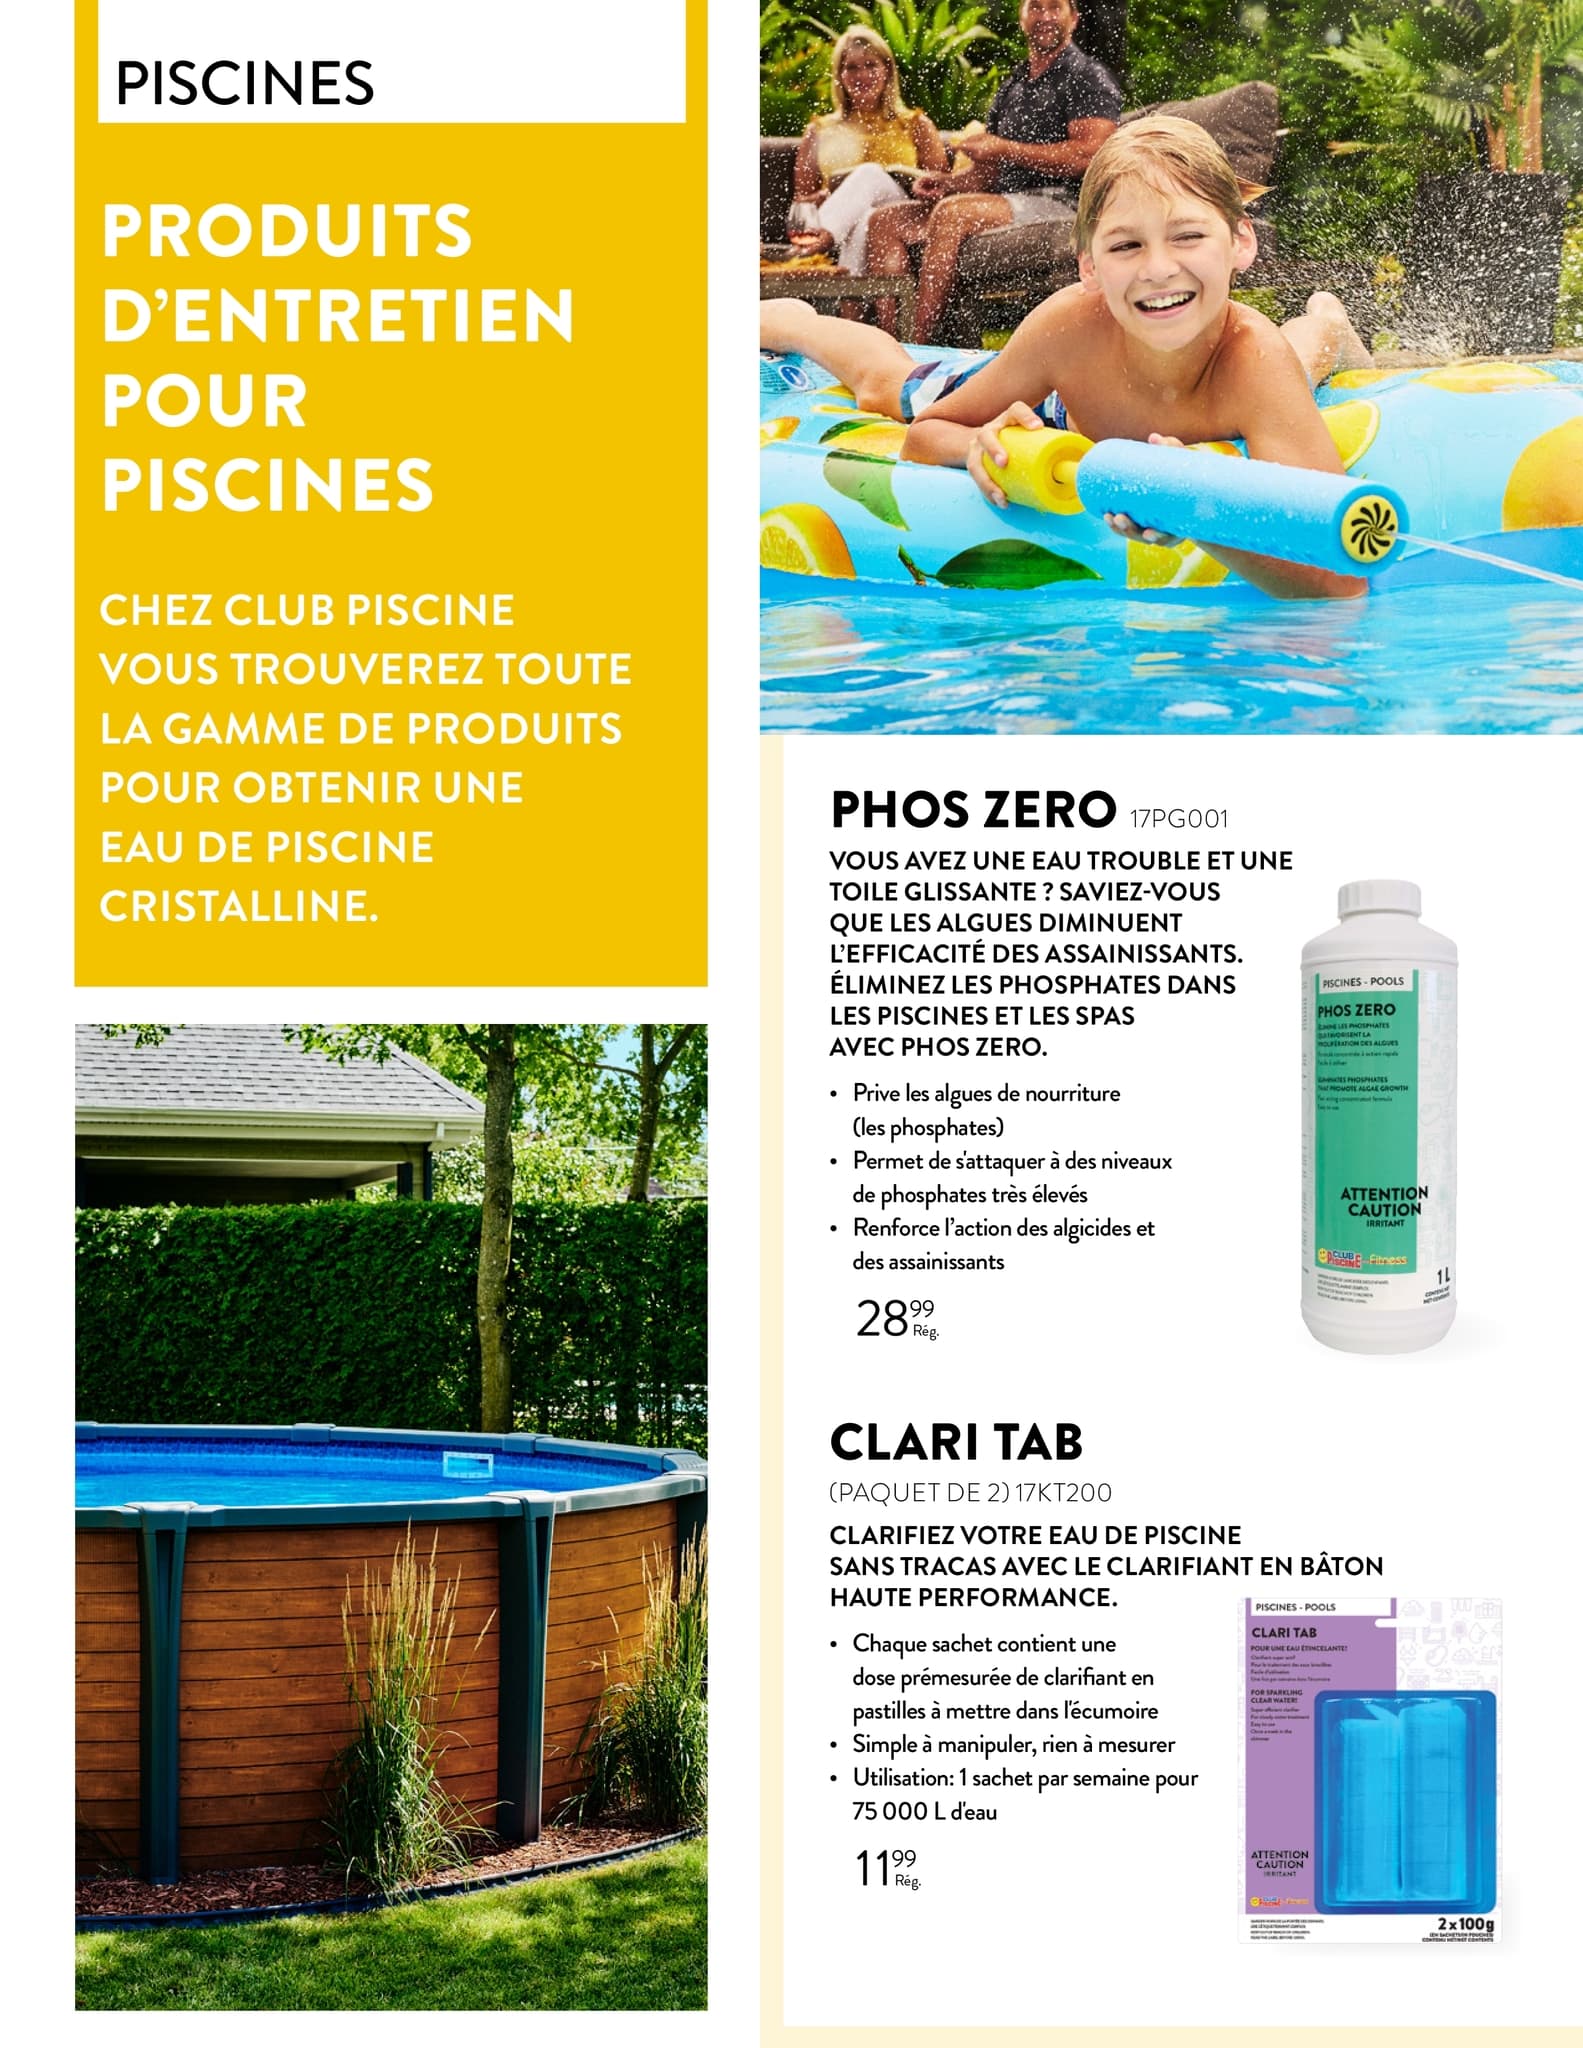 Circulaire Club Piscine Super Fitness - Page 2